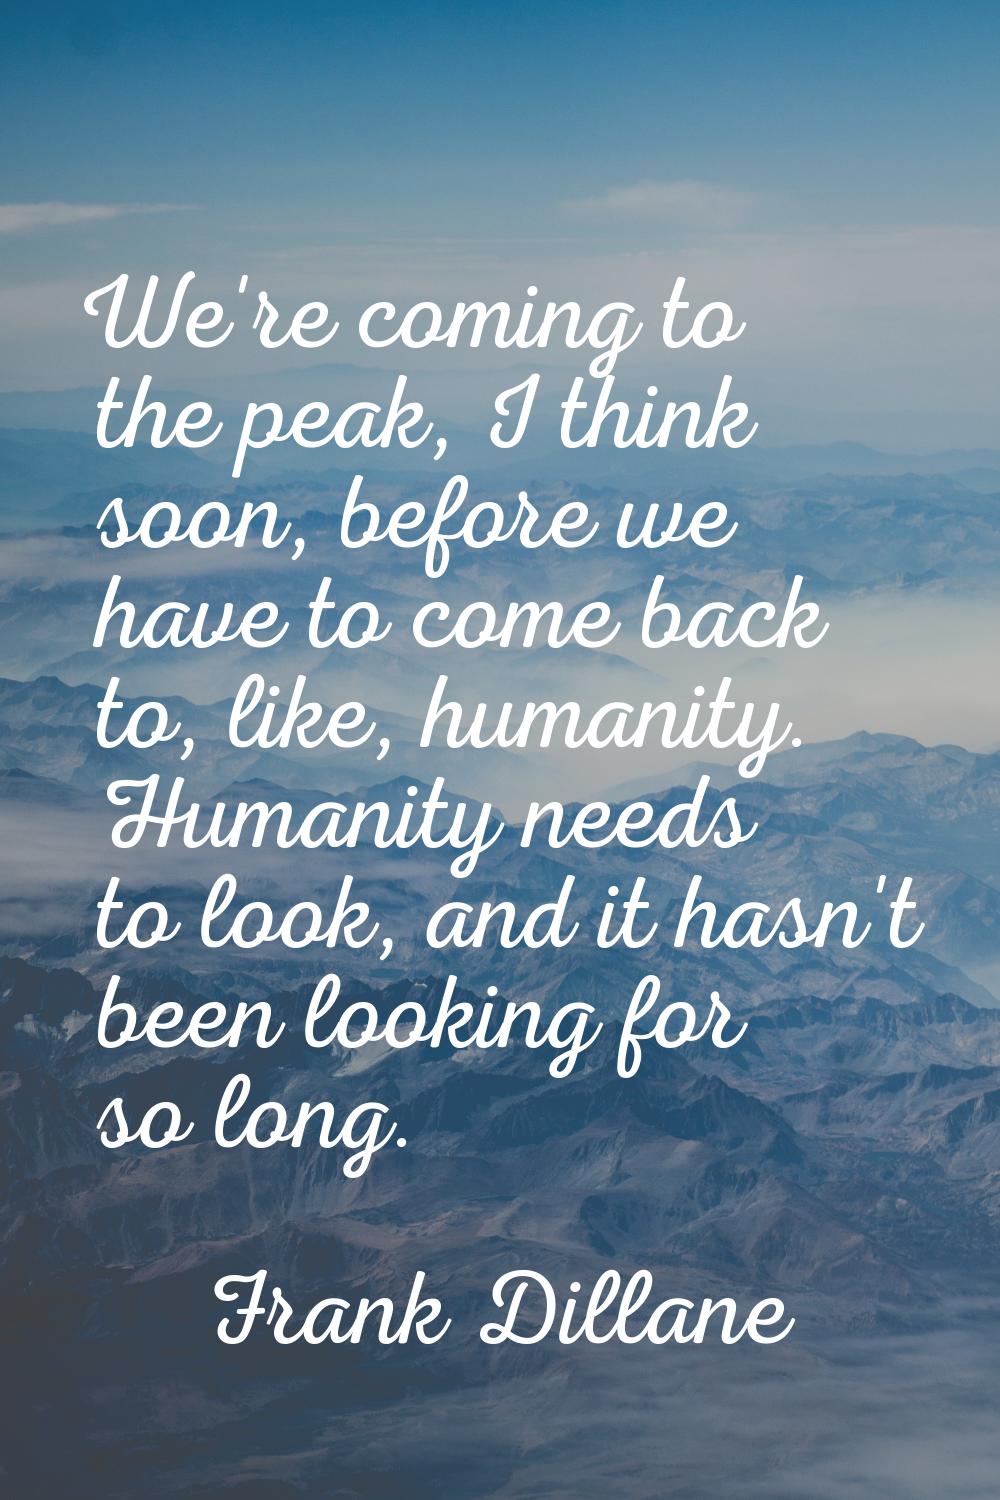 We're coming to the peak, I think soon, before we have to come back to, like, humanity. Humanity ne